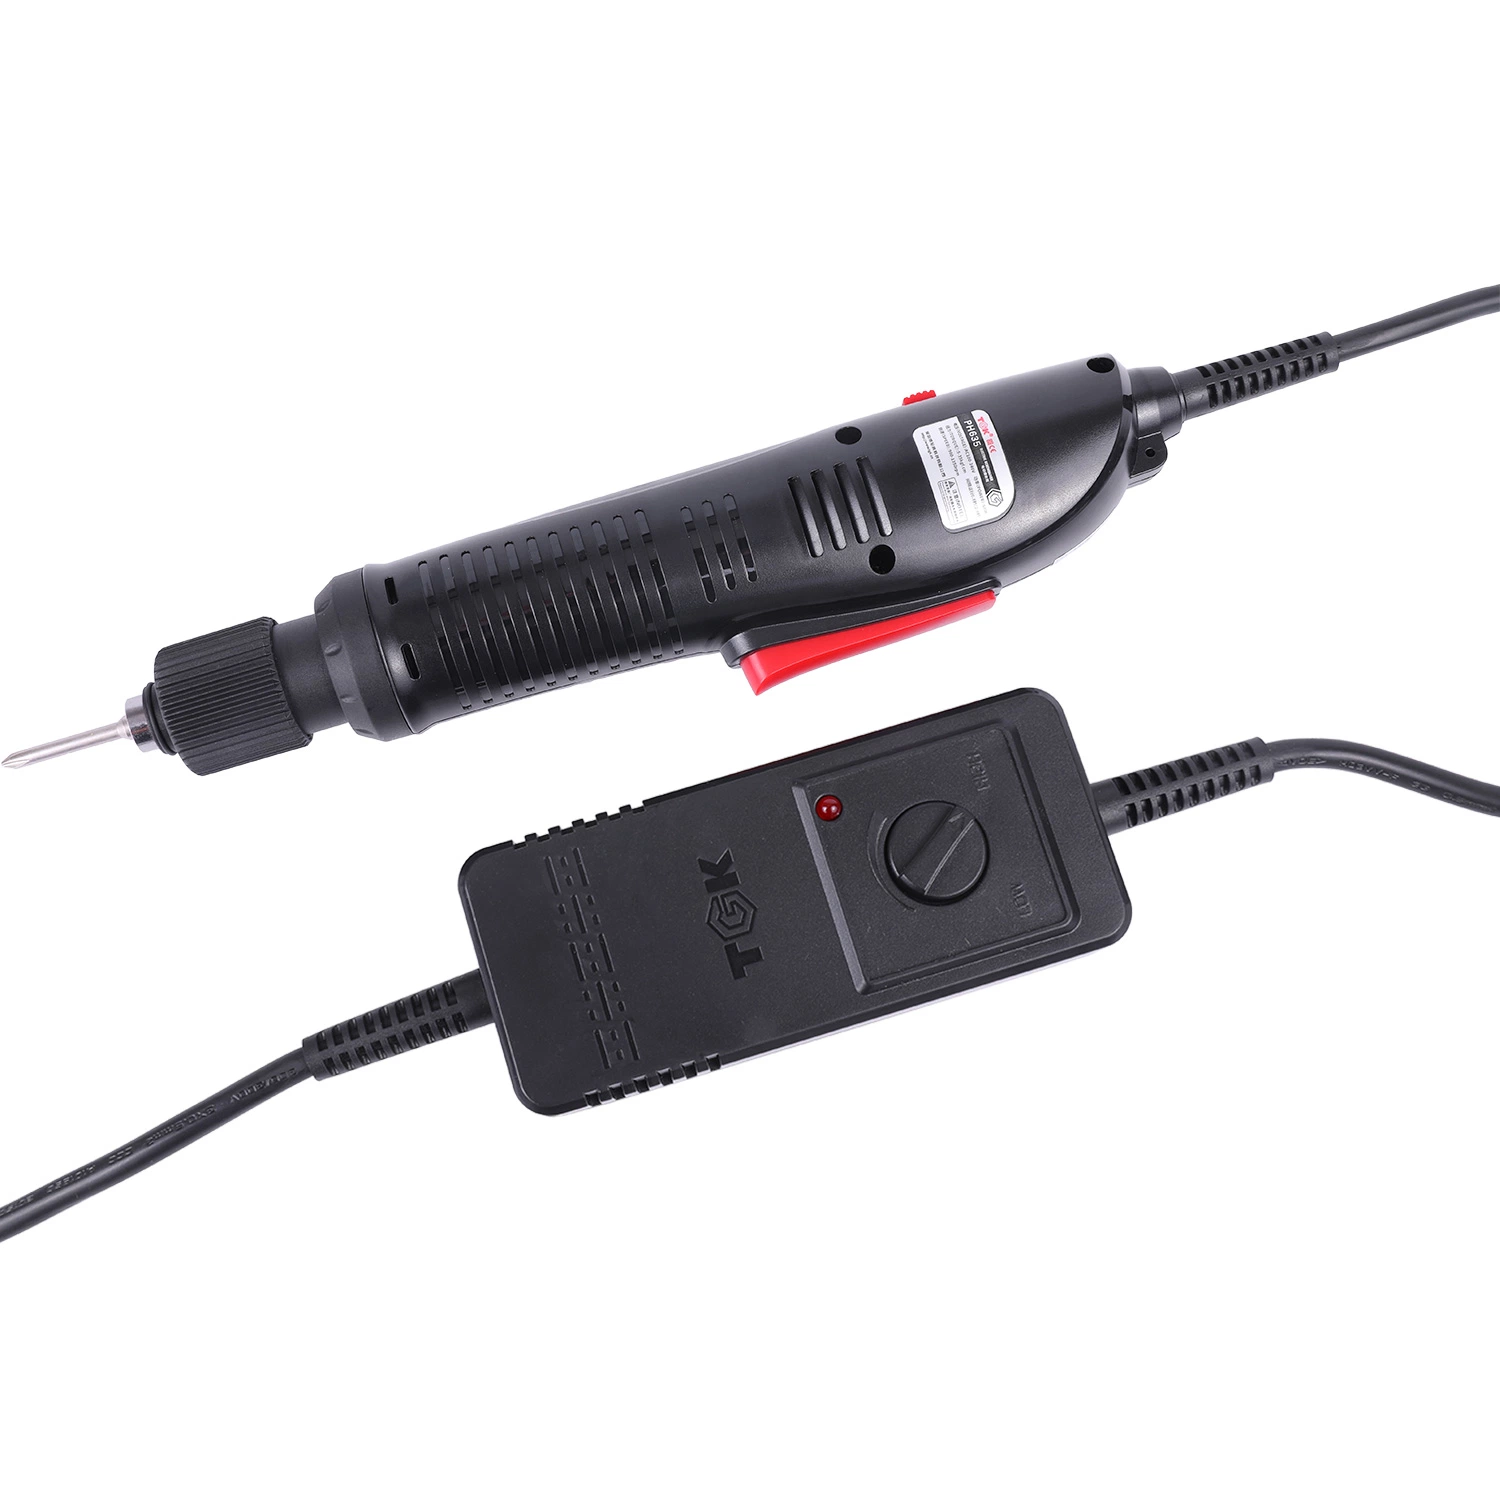 Electric Screwdriver Assembly Tool Helps Small Electronics Around The Home PS635